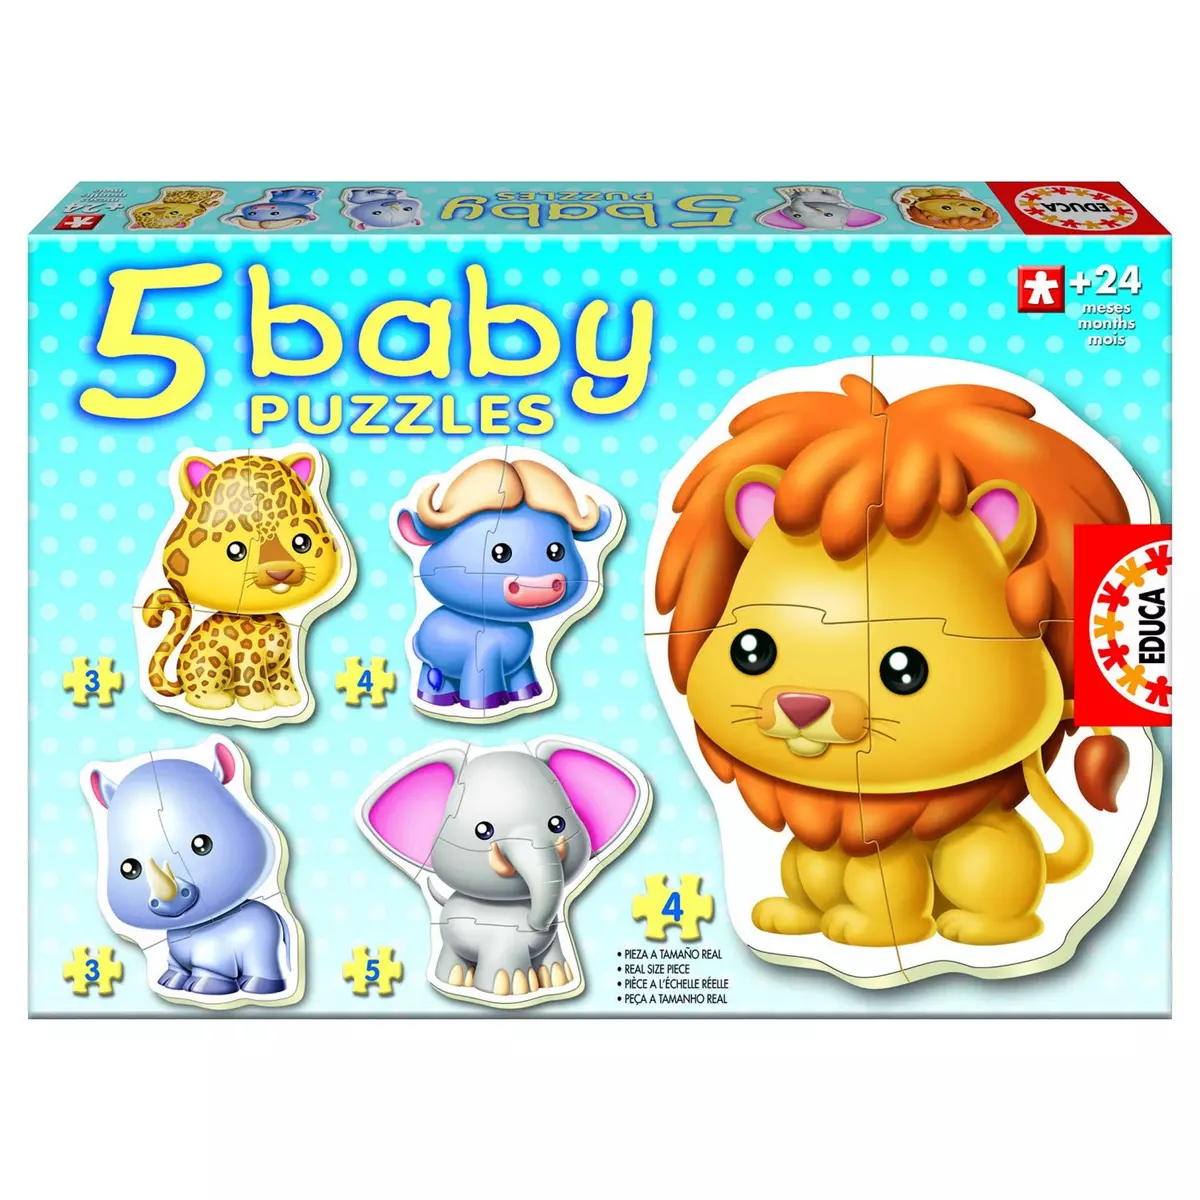 EDUCA Baby puzzle - 5 puzzles - Les animaux sauvages